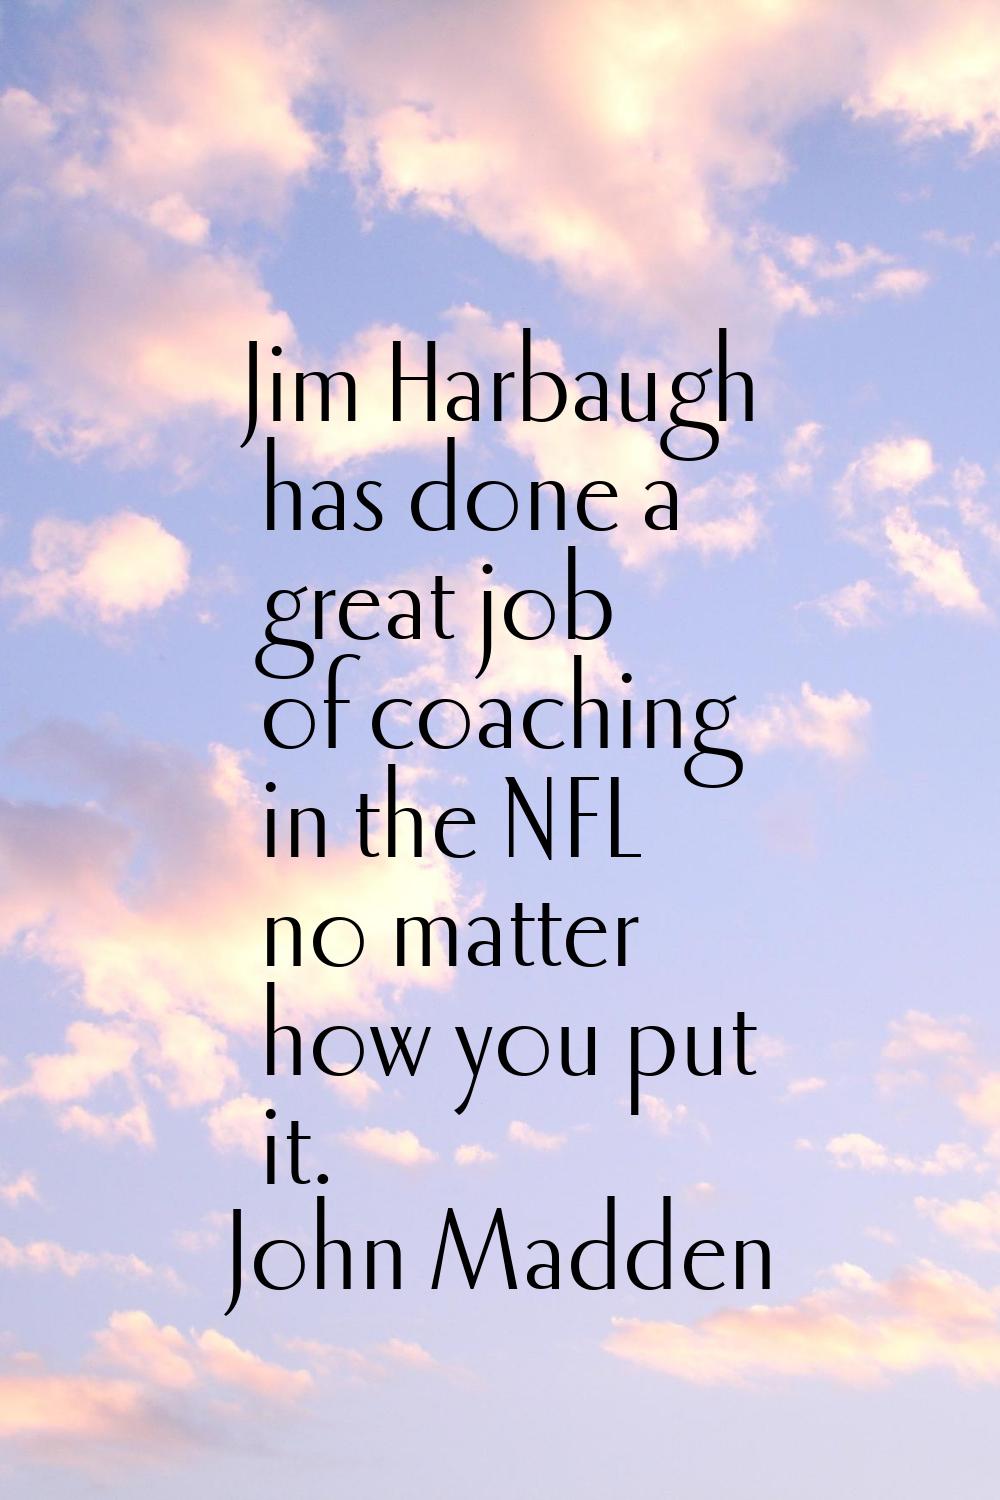 Jim Harbaugh has done a great job of coaching in the NFL no matter how you put it.